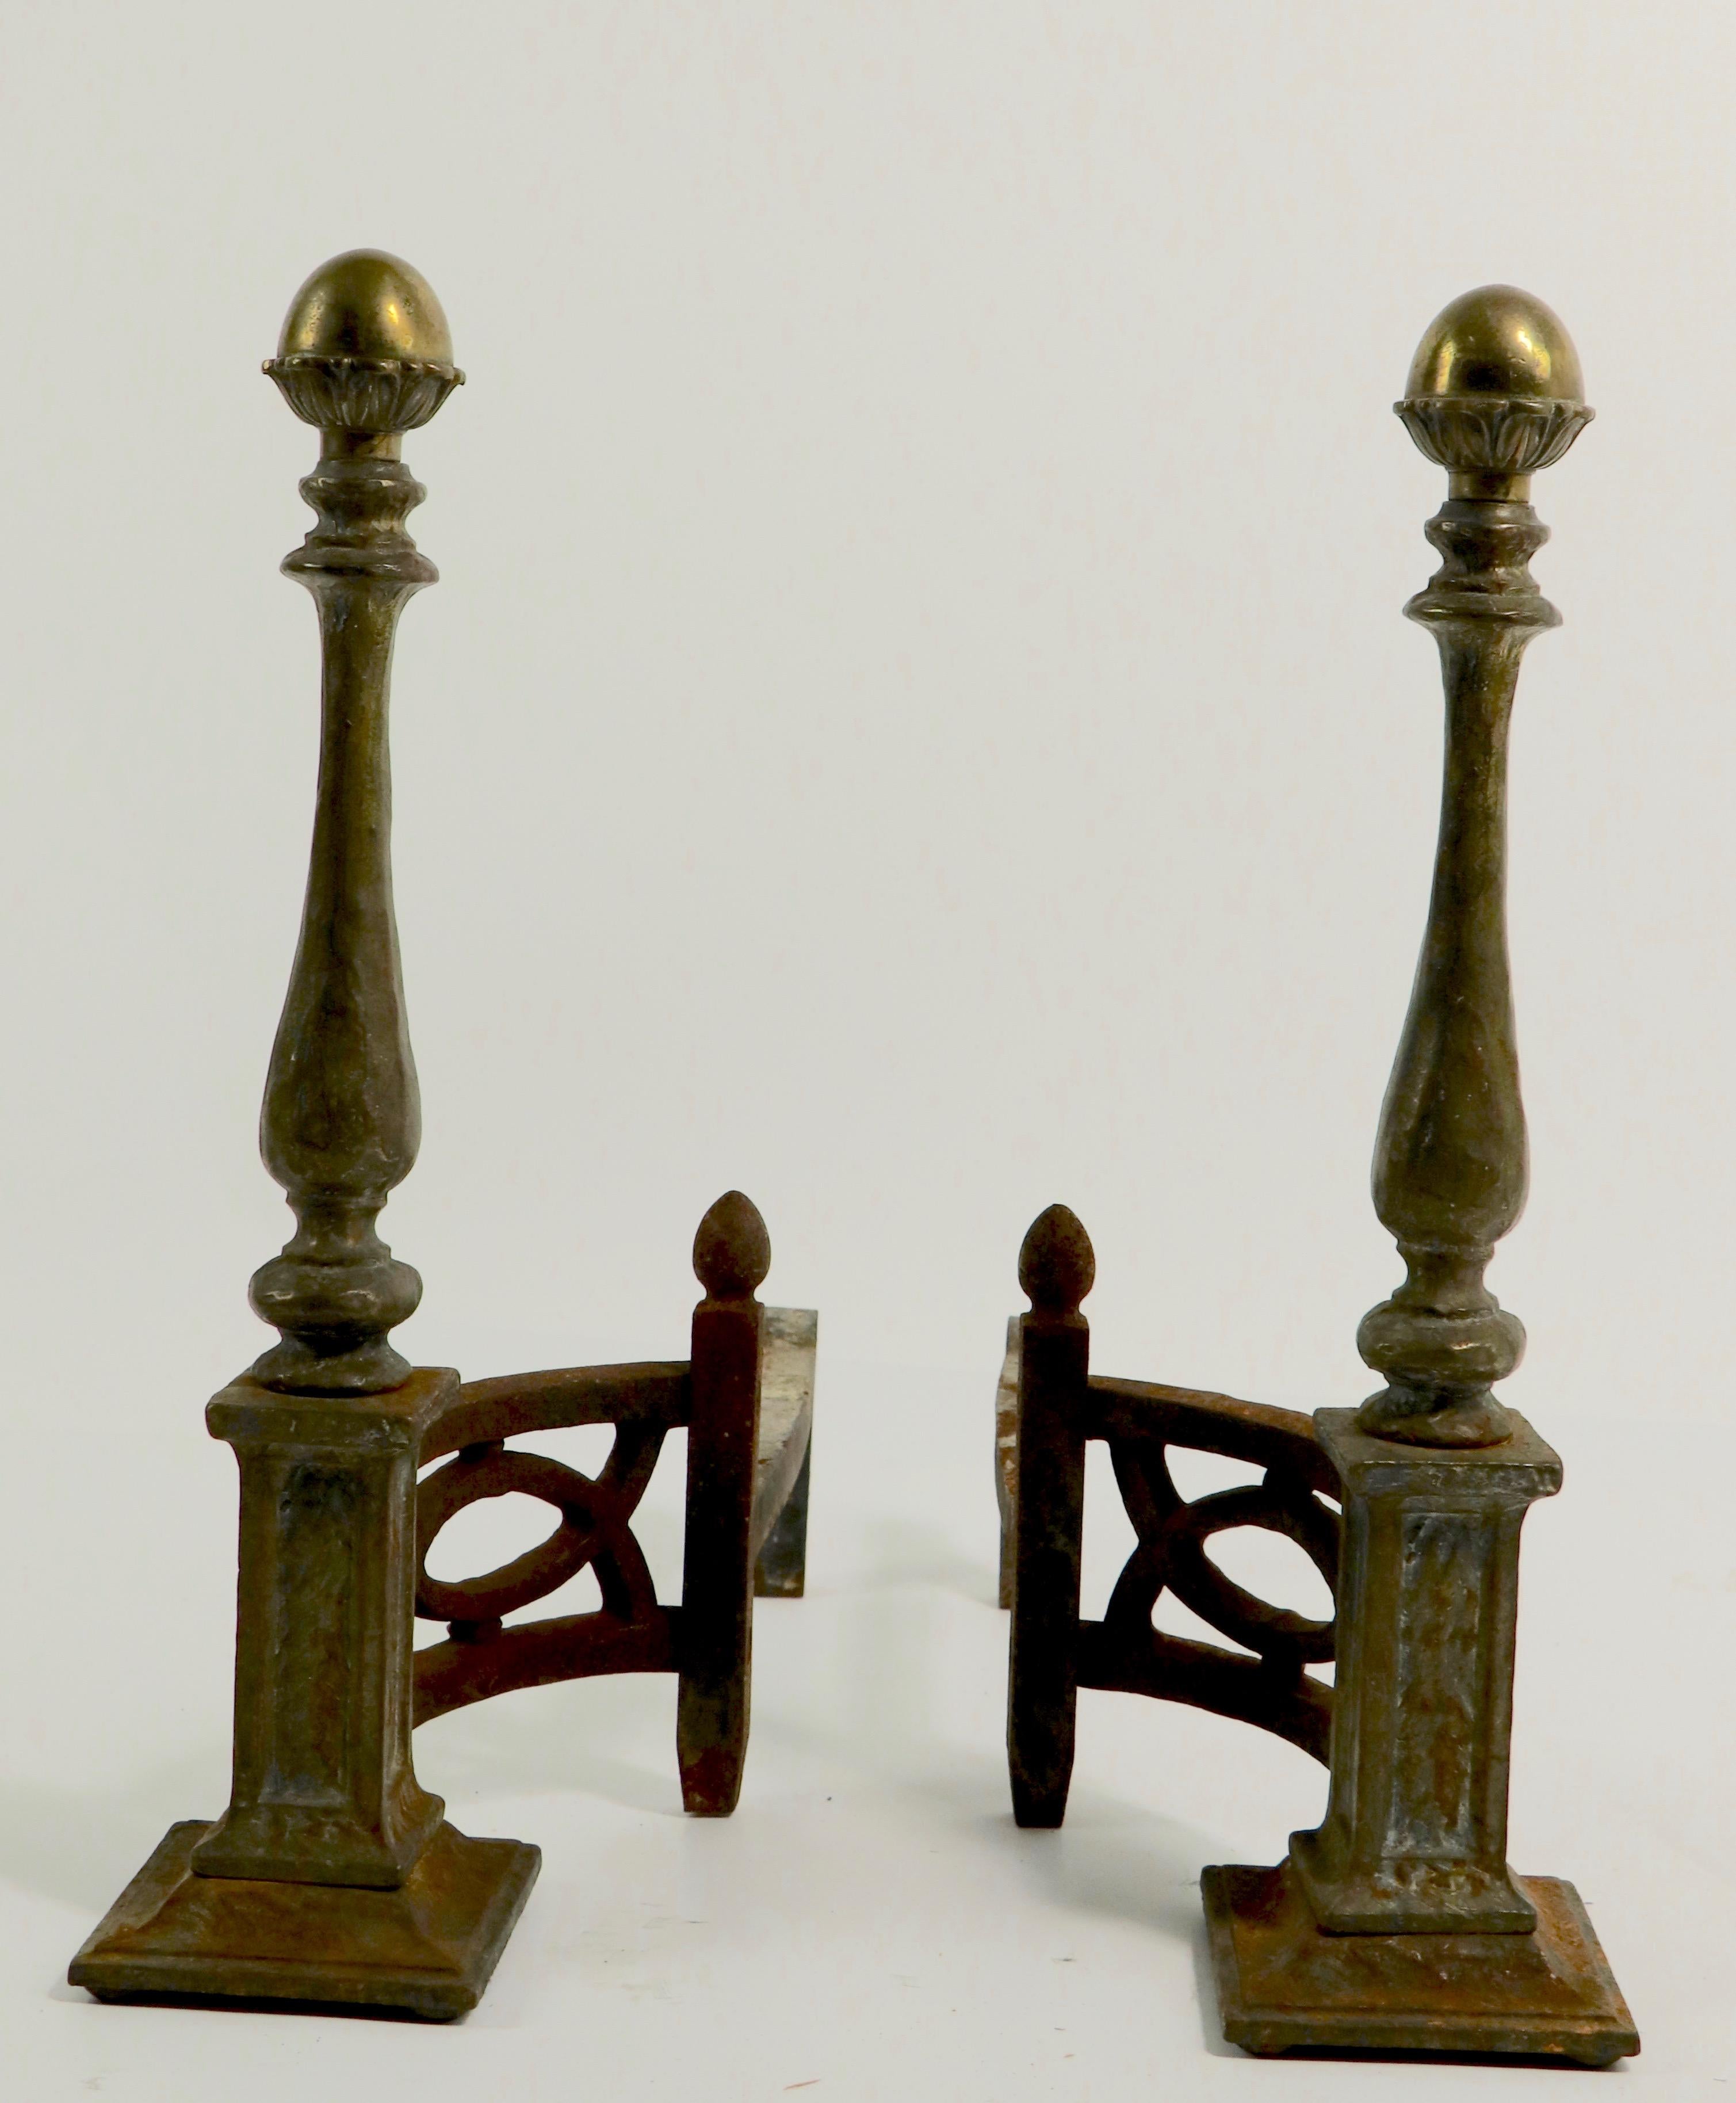 Very nice pair of English Arts & Crafts, Mission style andirons having solid cast iron bases and vertical standards with a decorative cast brass finial top.